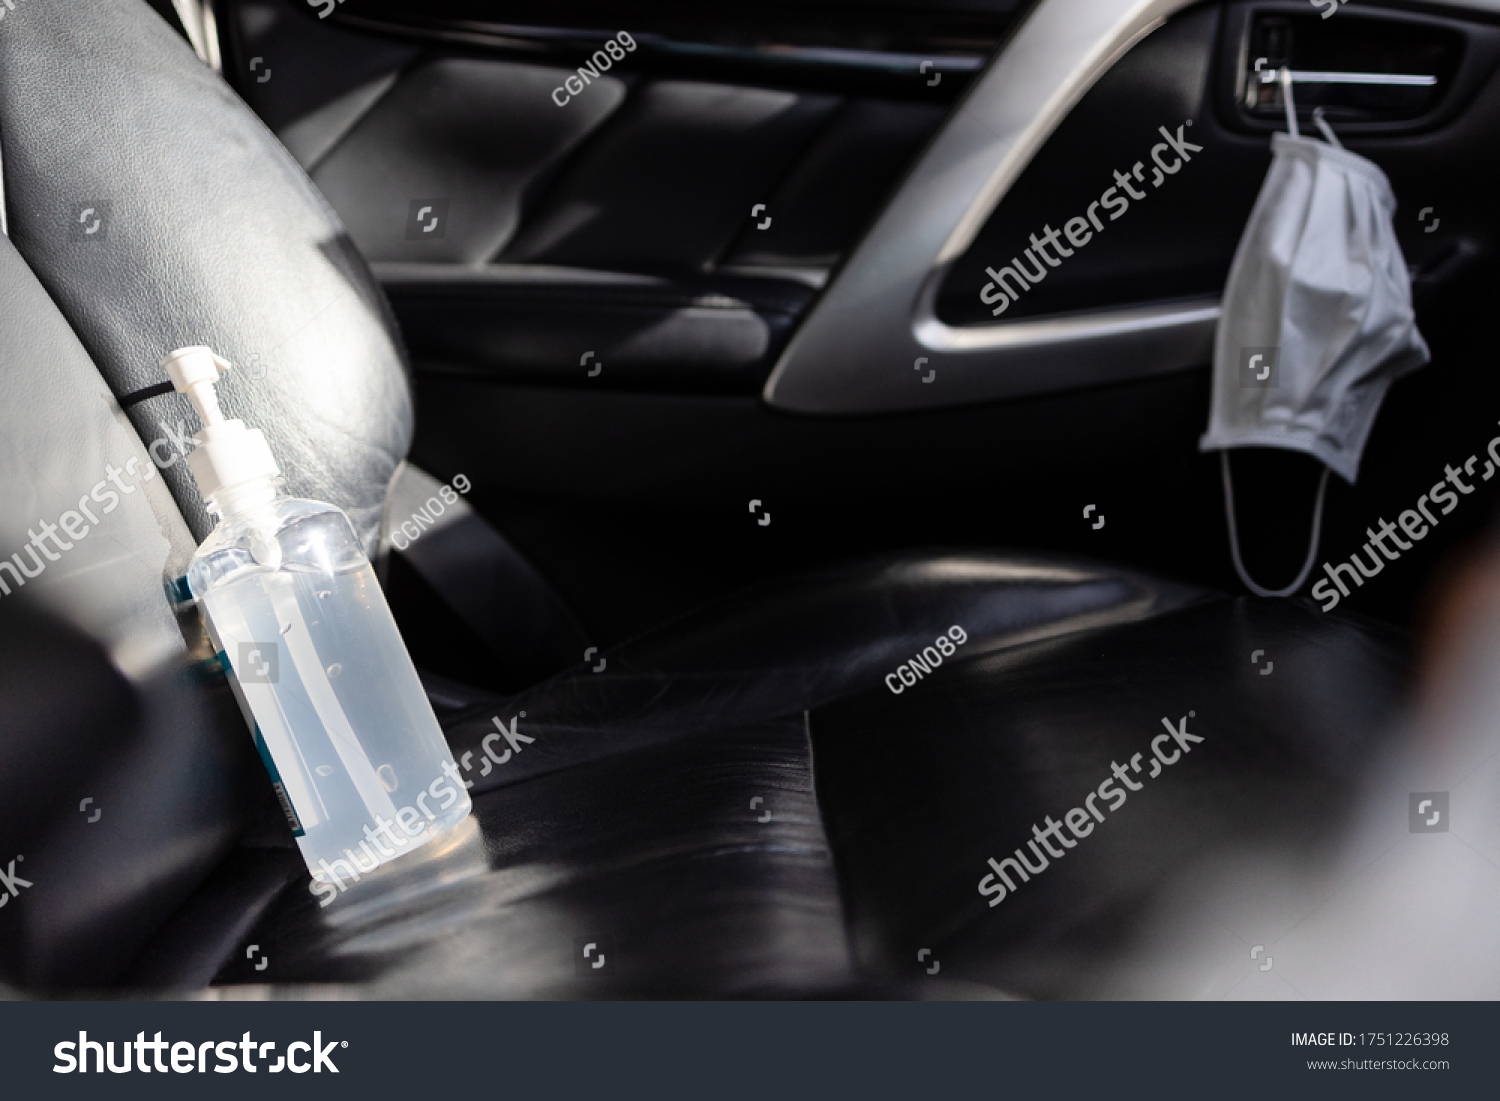 Hand sanitizer placed on car seat and exposed to sun for a long time in sunny very hot day,Do not keep alcohol antiseptic gel in the car,dangerous flammable objects can cause a fire inside the car
 #1751226398